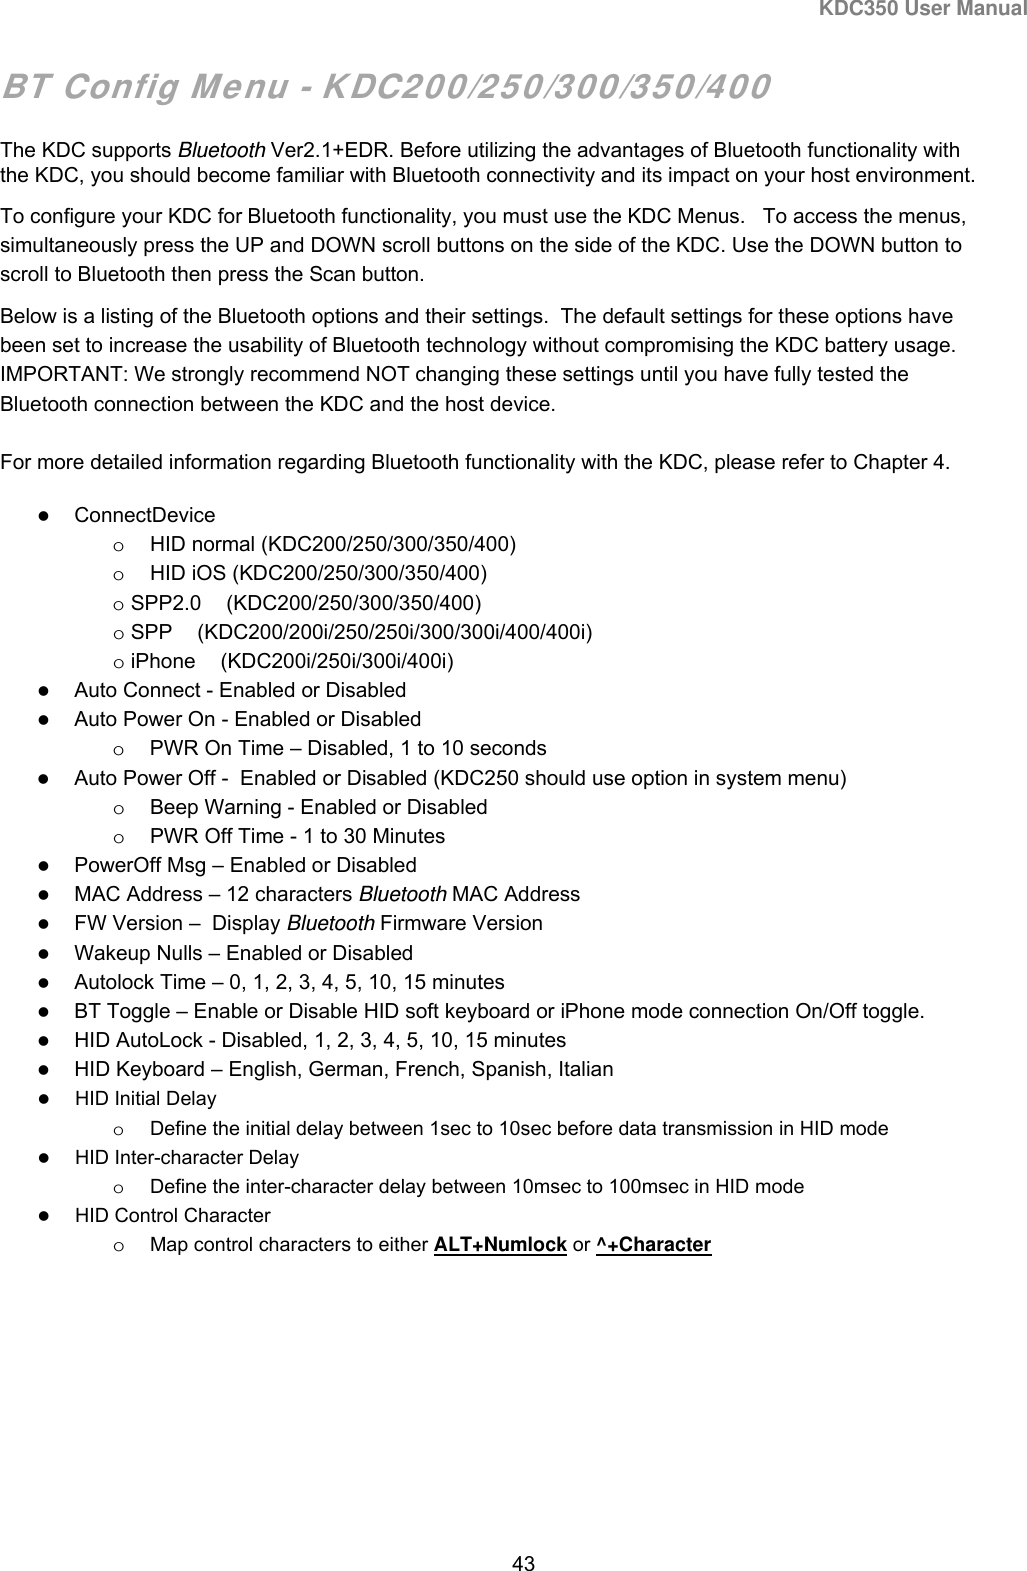 KDC350 User Manual  43  BT Config Menu - KDC200/250/300/350/400 The KDC supports Bluetooth Ver2.1+EDR. Before utilizing the advantages of Bluetooth functionality with the KDC, you should become familiar with Bluetooth connectivity and its impact on your host environment.  To configure your KDC for Bluetooth functionality, you must use the KDC Menus.   To access the menus, simultaneously press the UP and DOWN scroll buttons on the side of the KDC. Use the DOWN button to scroll to Bluetooth then press the Scan button.  Below is a listing of the Bluetooth options and their settings.  The default settings for these options have been set to increase the usability of Bluetooth technology without compromising the KDC battery usage.   IMPORTANT: We strongly recommend NOT changing these settings until you have fully tested the Bluetooth connection between the KDC and the host device.  For more detailed information regarding Bluetooth functionality with the KDC, please refer to Chapter 4.  ConnectDevice o  HID normal (KDC200/250/300/350/400) o  HID iOS (KDC200/250/300/350/400) o SPP2.0 (KDC200/250/300/350/400) o SPP (KDC200/200i/250/250i/300/300i/400/400i) o iPhone (KDC200i/250i/300i/400i)  Auto Connect - Enabled or Disabled   Auto Power On - Enabled or Disabled  o  PWR On Time – Disabled, 1 to 10 seconds   Auto Power Off -  Enabled or Disabled (KDC250 should use option in system menu) o  Beep Warning - Enabled or Disabled  o  PWR Off Time - 1 to 30 Minutes   PowerOff Msg – Enabled or Disabled  MAC Address – 12 characters Bluetooth MAC Address   FW Version –  Display Bluetooth Firmware Version  Wakeup Nulls – Enabled or Disabled  Autolock Time – 0, 1, 2, 3, 4, 5, 10, 15 minutes  BT Toggle – Enable or Disable HID soft keyboard or iPhone mode connection On/Off toggle.  HID AutoLock - Disabled, 1, 2, 3, 4, 5, 10, 15 minutes  HID Keyboard – English, German, French, Spanish, Italian  HID Initial Delay o  Define the initial delay between 1sec to 10sec before data transmission in HID mode  HID Inter-character Delay o  Define the inter-character delay between 10msec to 100msec in HID mode  HID Control Character o Map control characters to either ALT+Numlock or ^+Character 